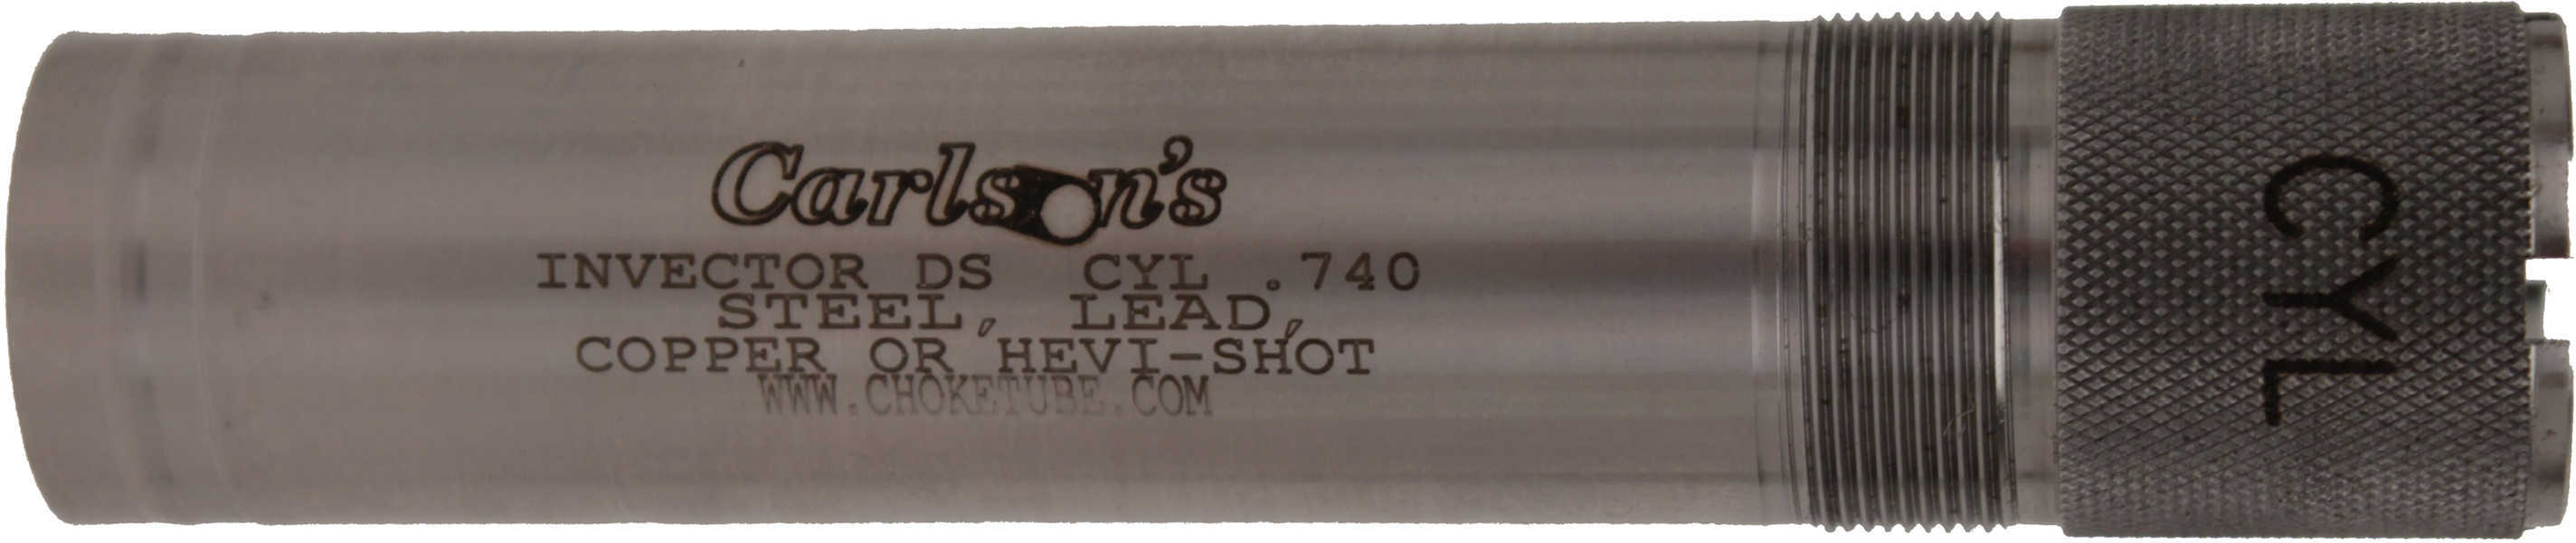 Carlsons Choke Tube Sporting C Browning Invector Ds Cylinder